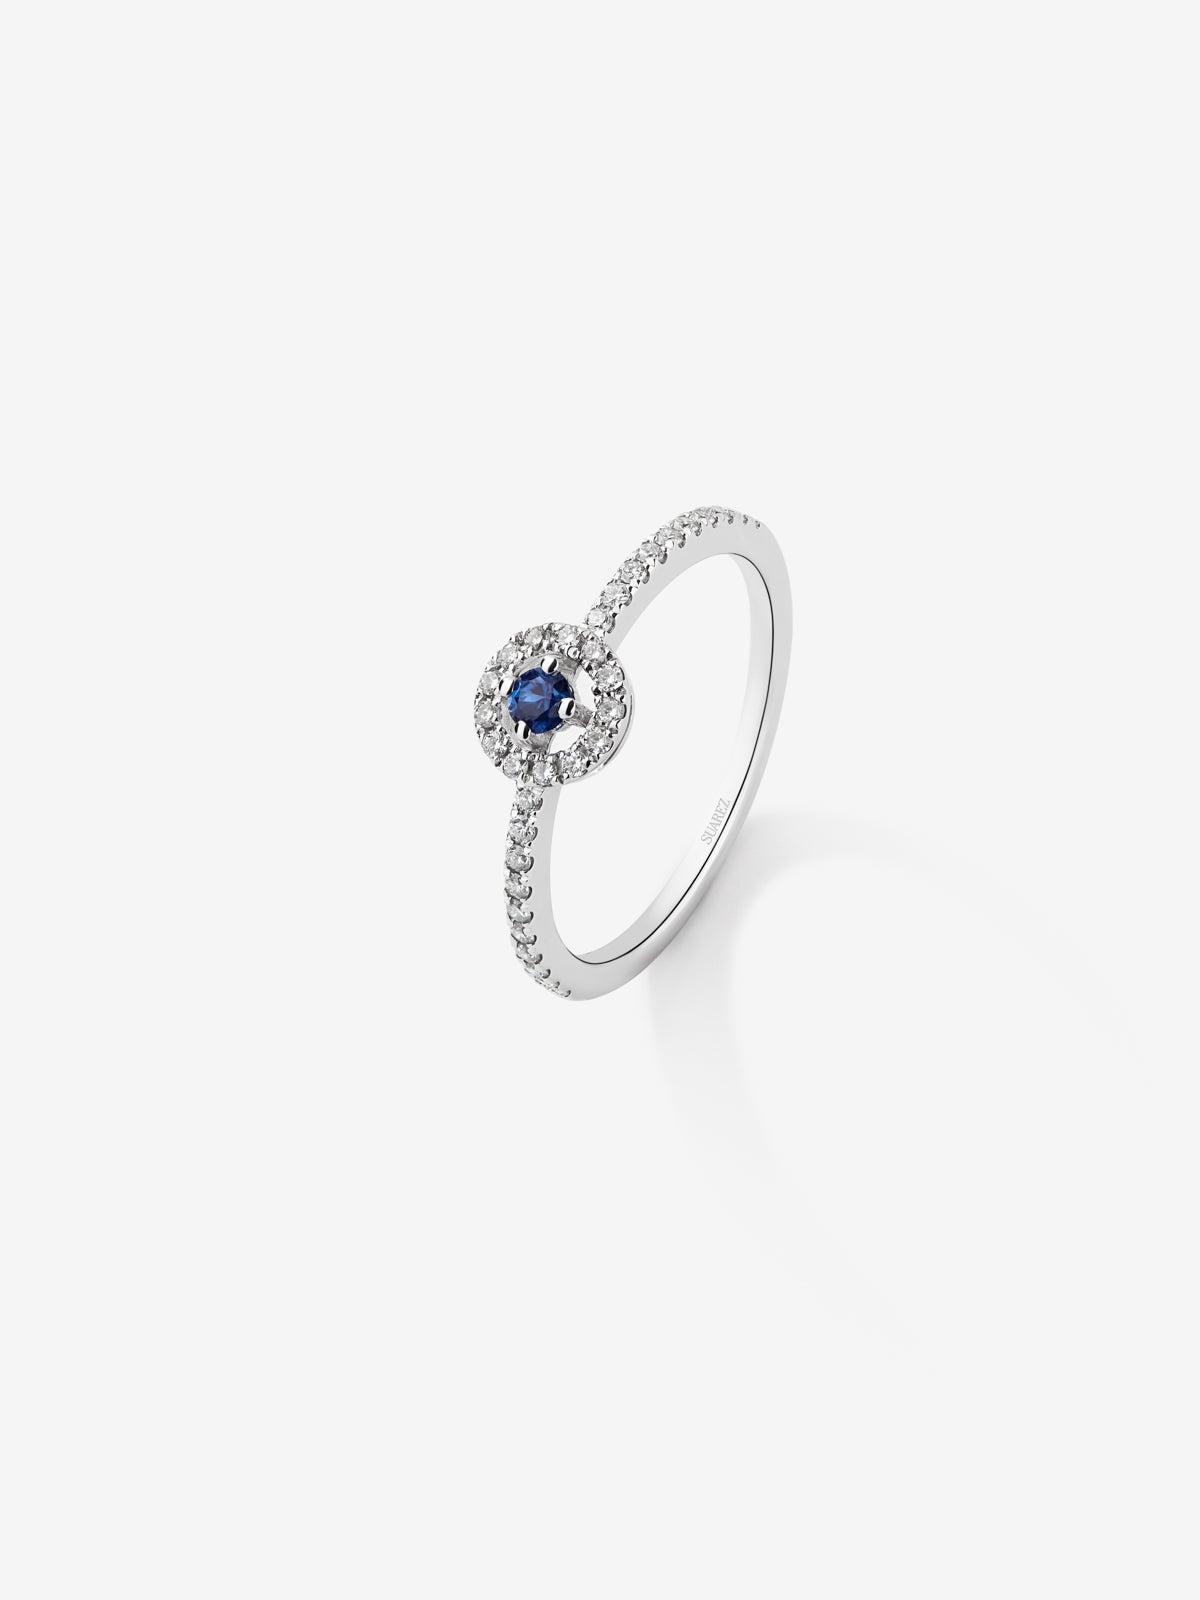 18K White Gold Halo Ring with Sapphire and Diamond